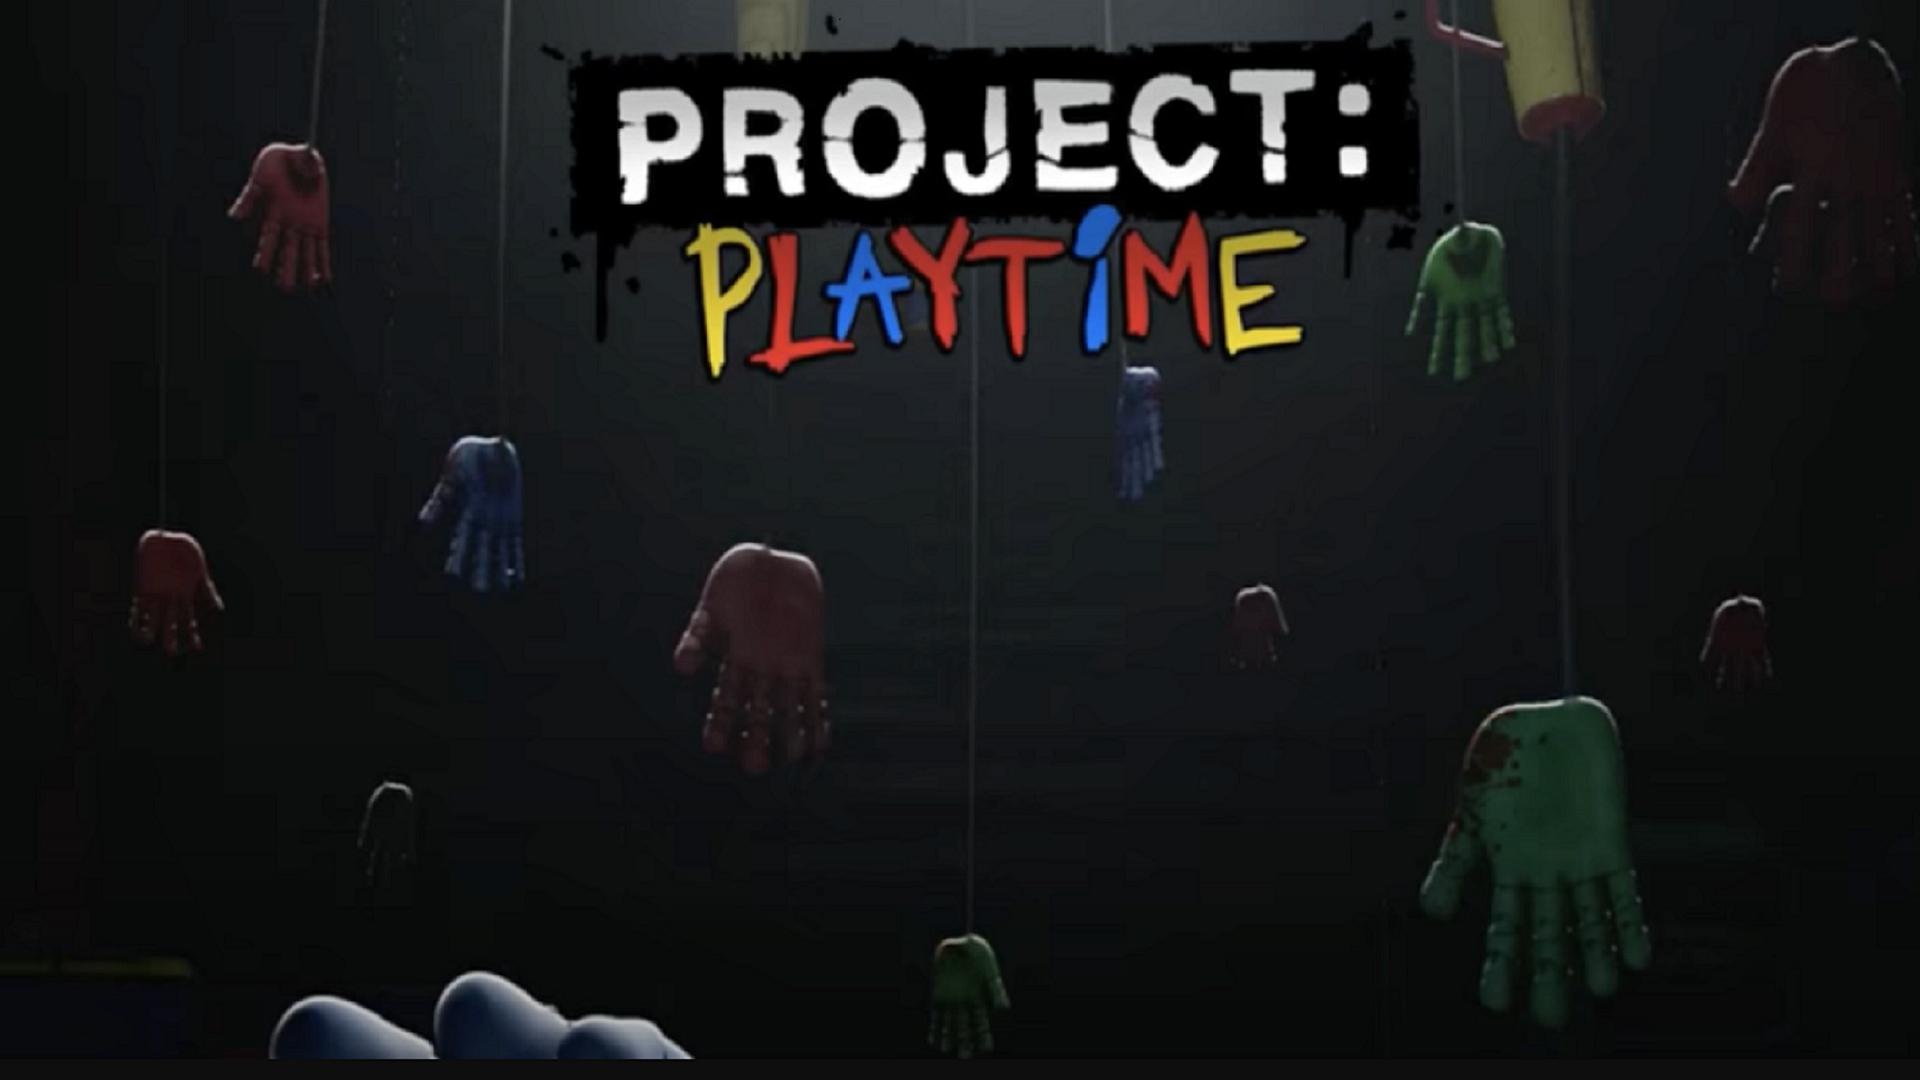 Project:Playtime Roblox Vs Project:Playtime Vs Project:Playtime Mobile Vs  Project:Playtime Mod 